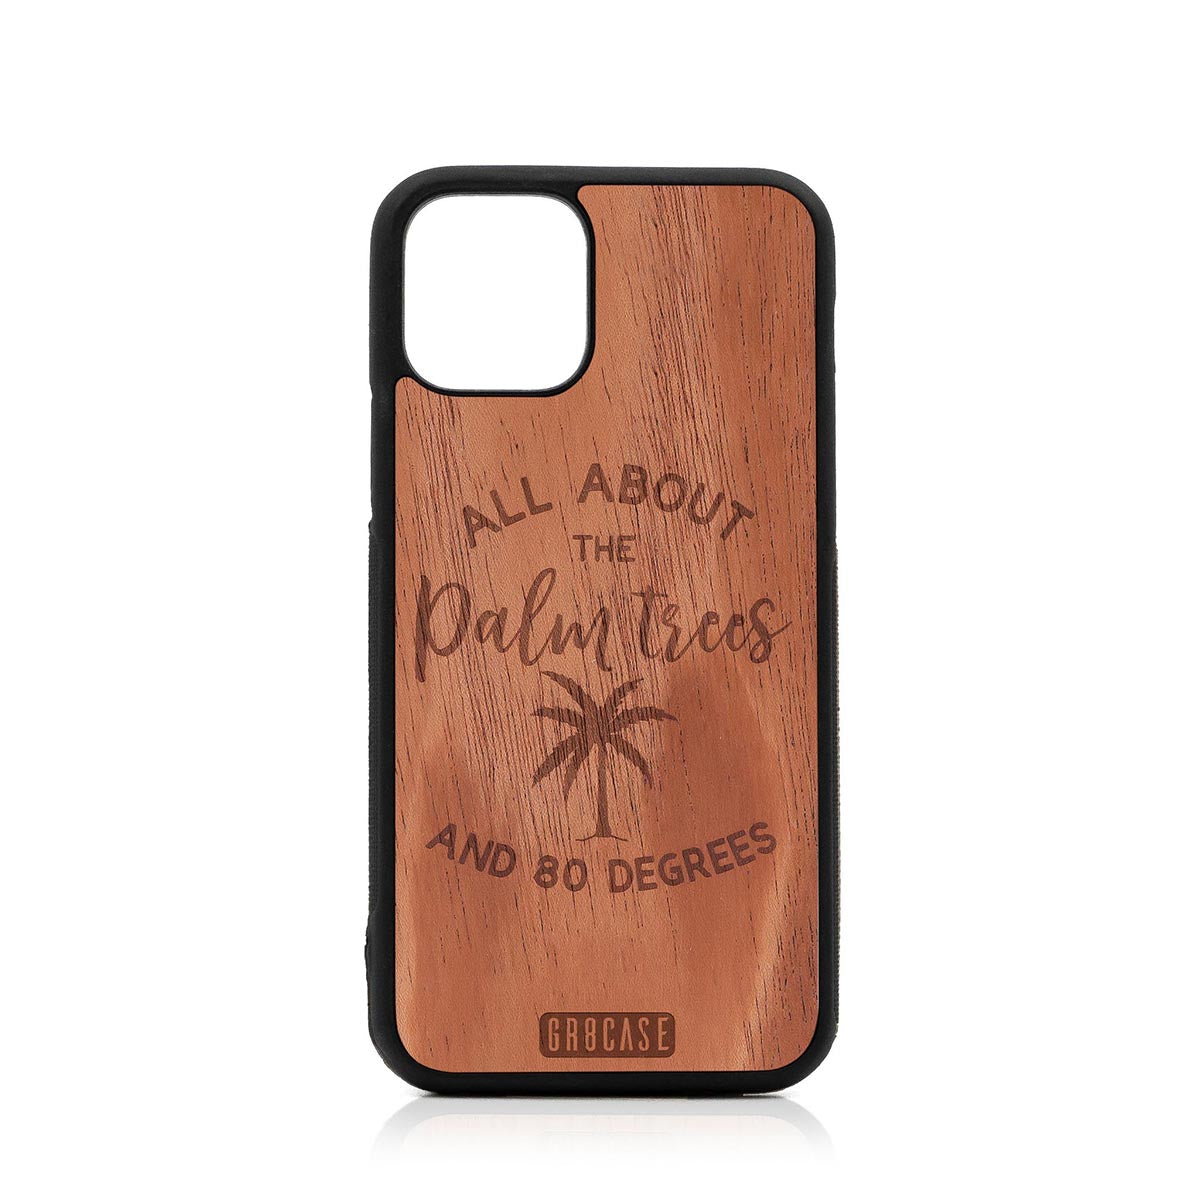 All About The Palm Trees and 80 Degrees Design Wood Case For iPhone 11 Pro by GR8CASE